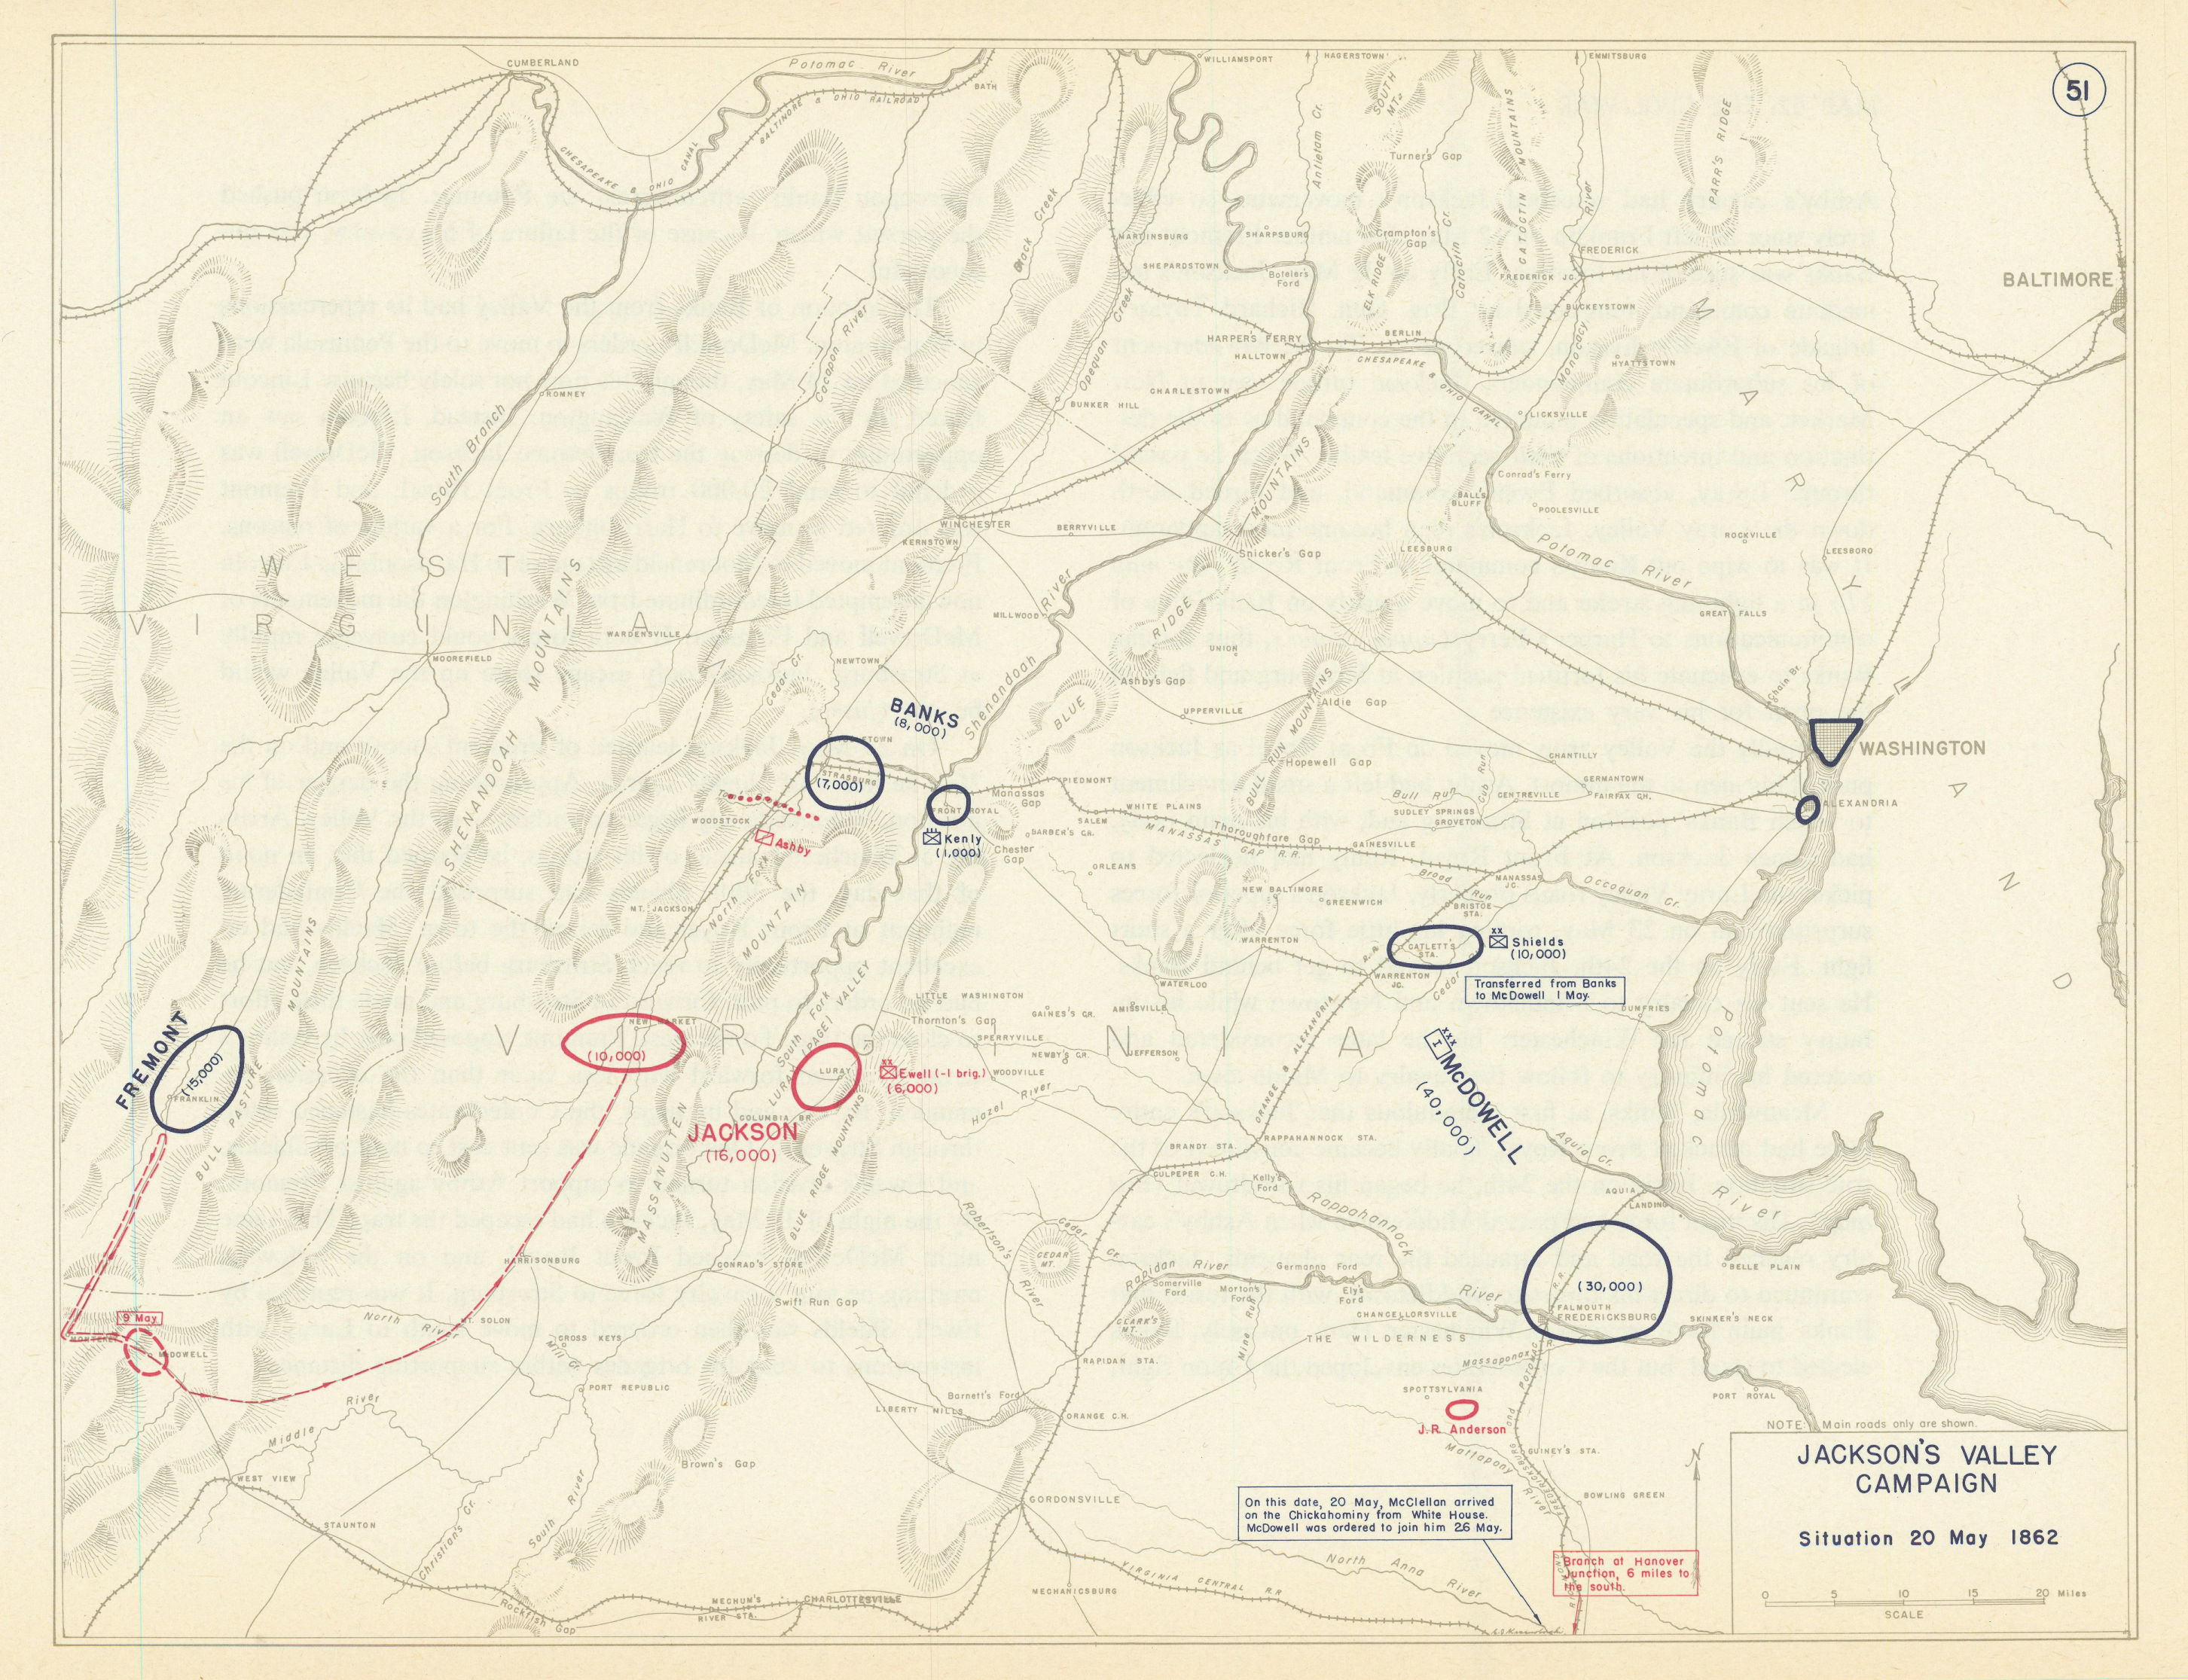 American Civil War. Situation 20 May 1862. Jackson's Valley Campaign 1959 map